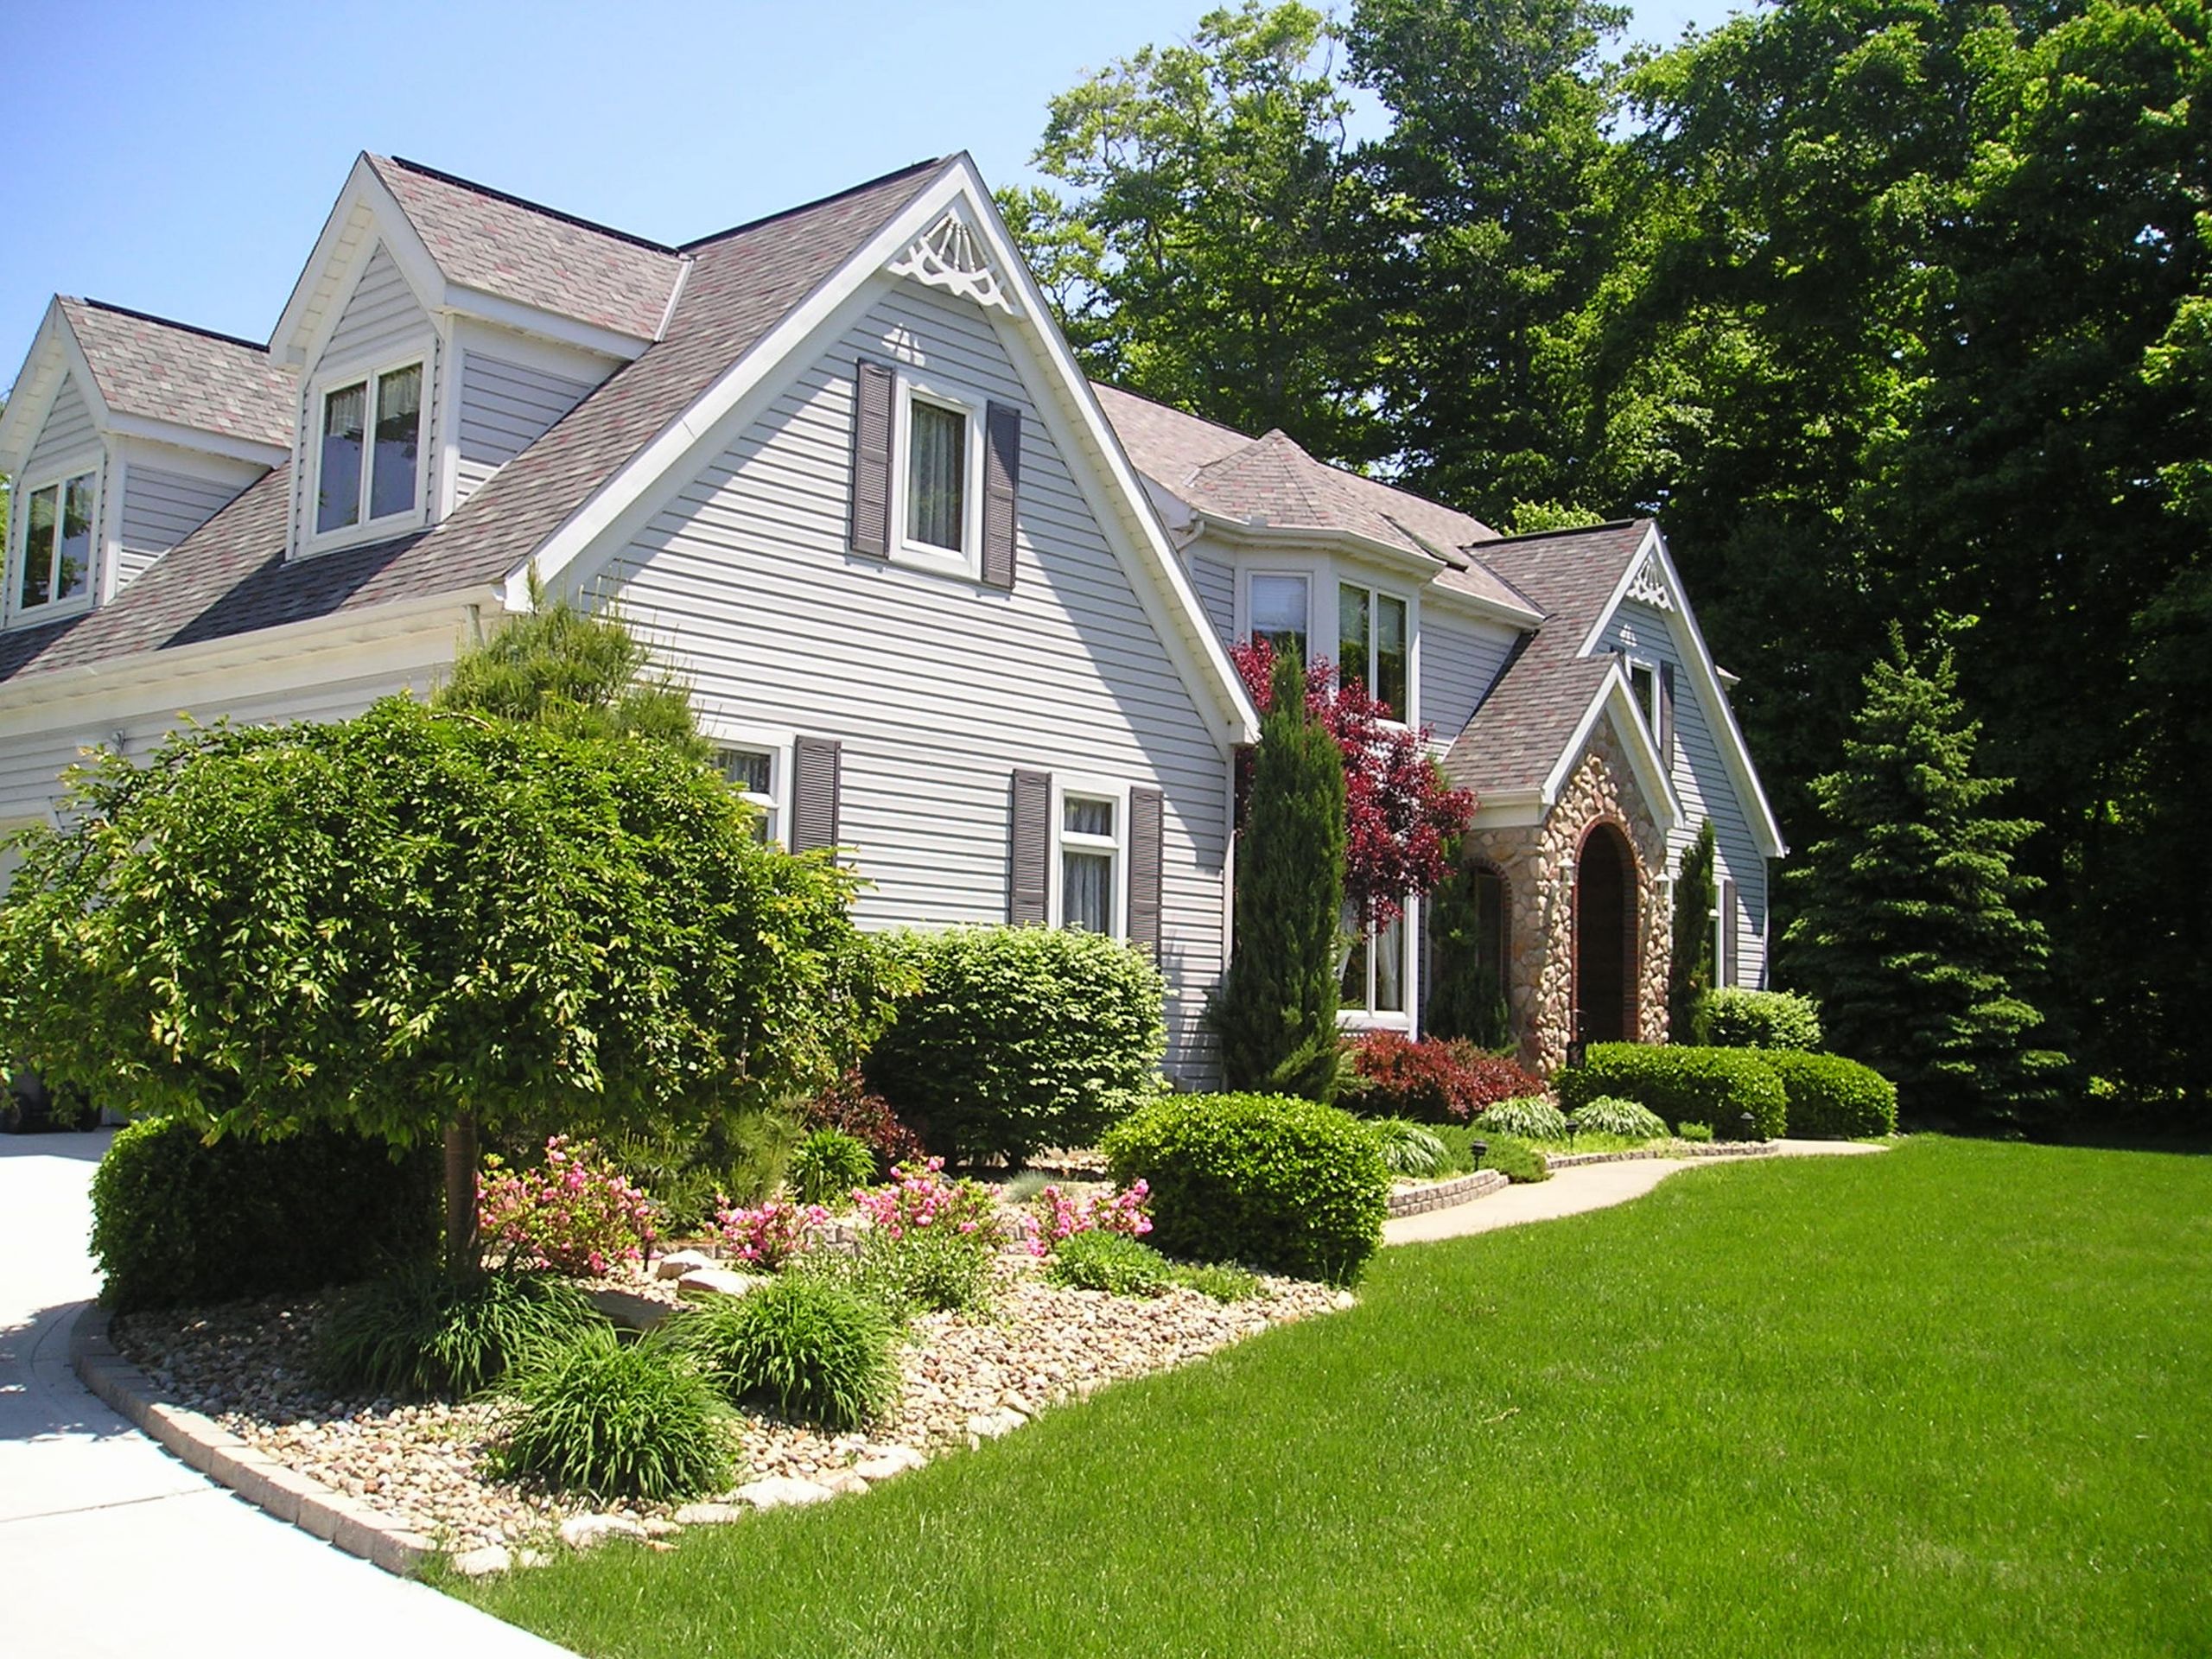 Home Landscape Design
 10 Awesome Ways to Improve Your Curb Appeal